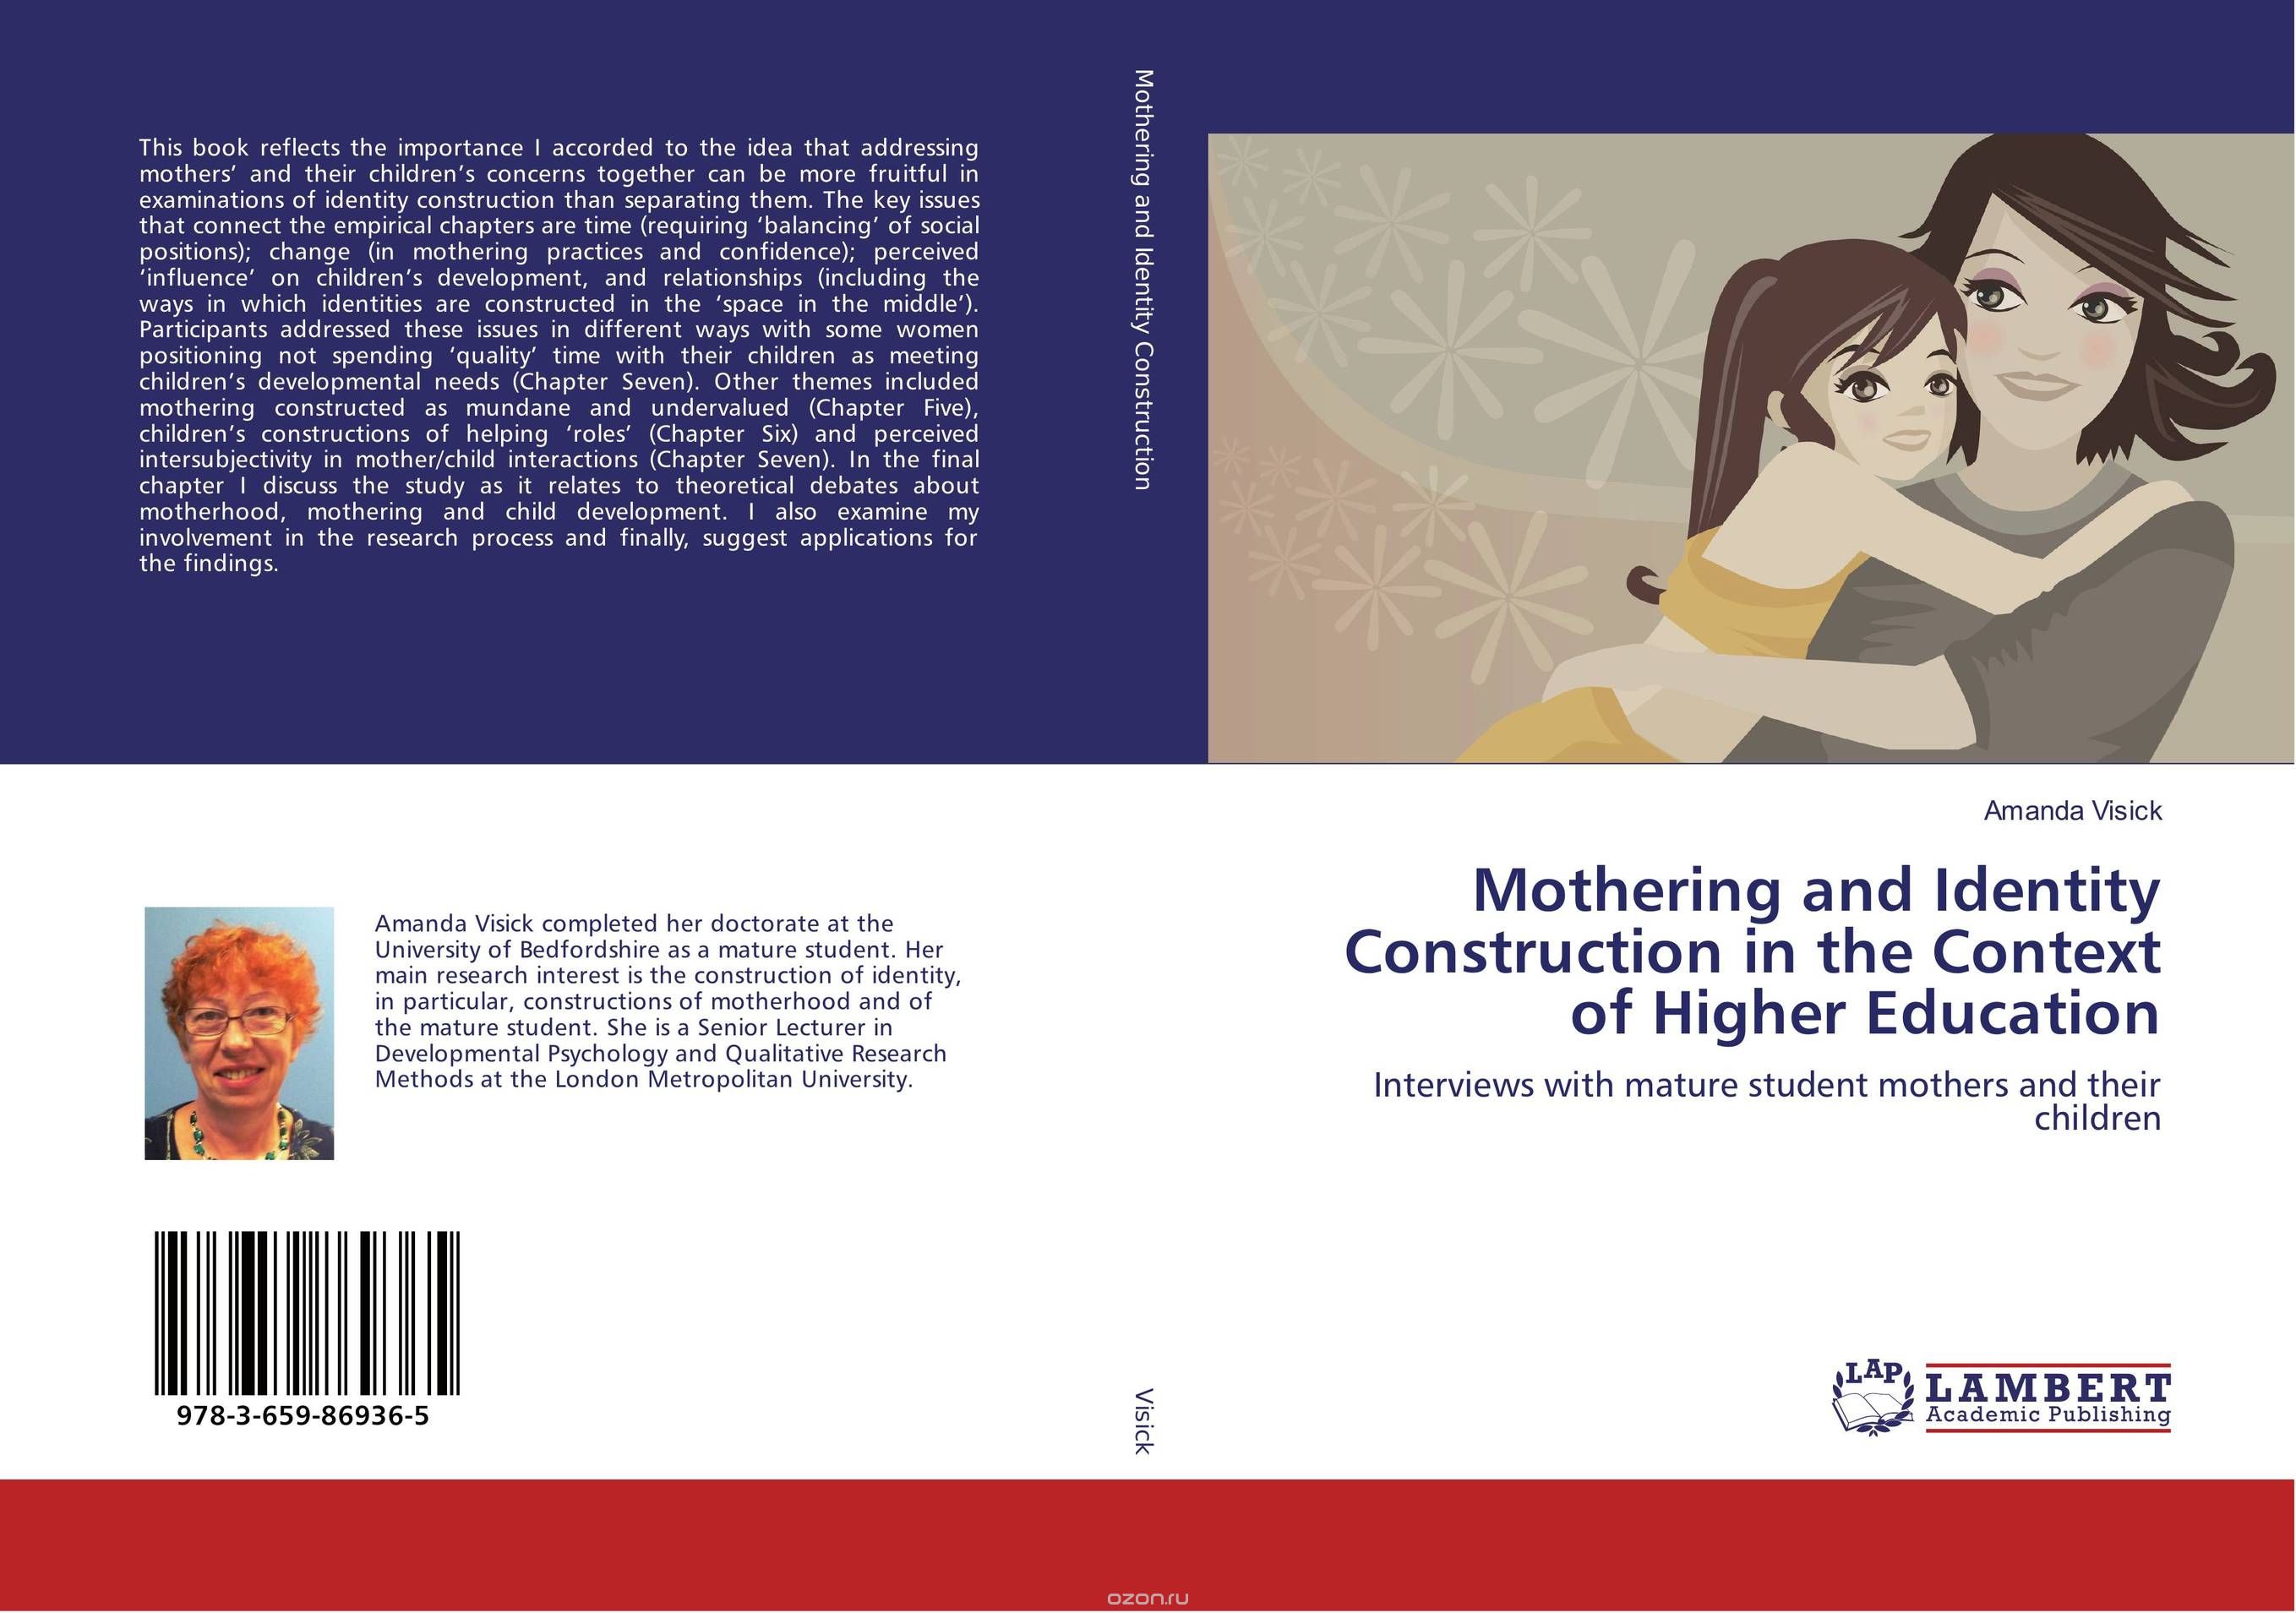 Скачать книгу "Mothering and Identity Construction in the Context of Higher Education"